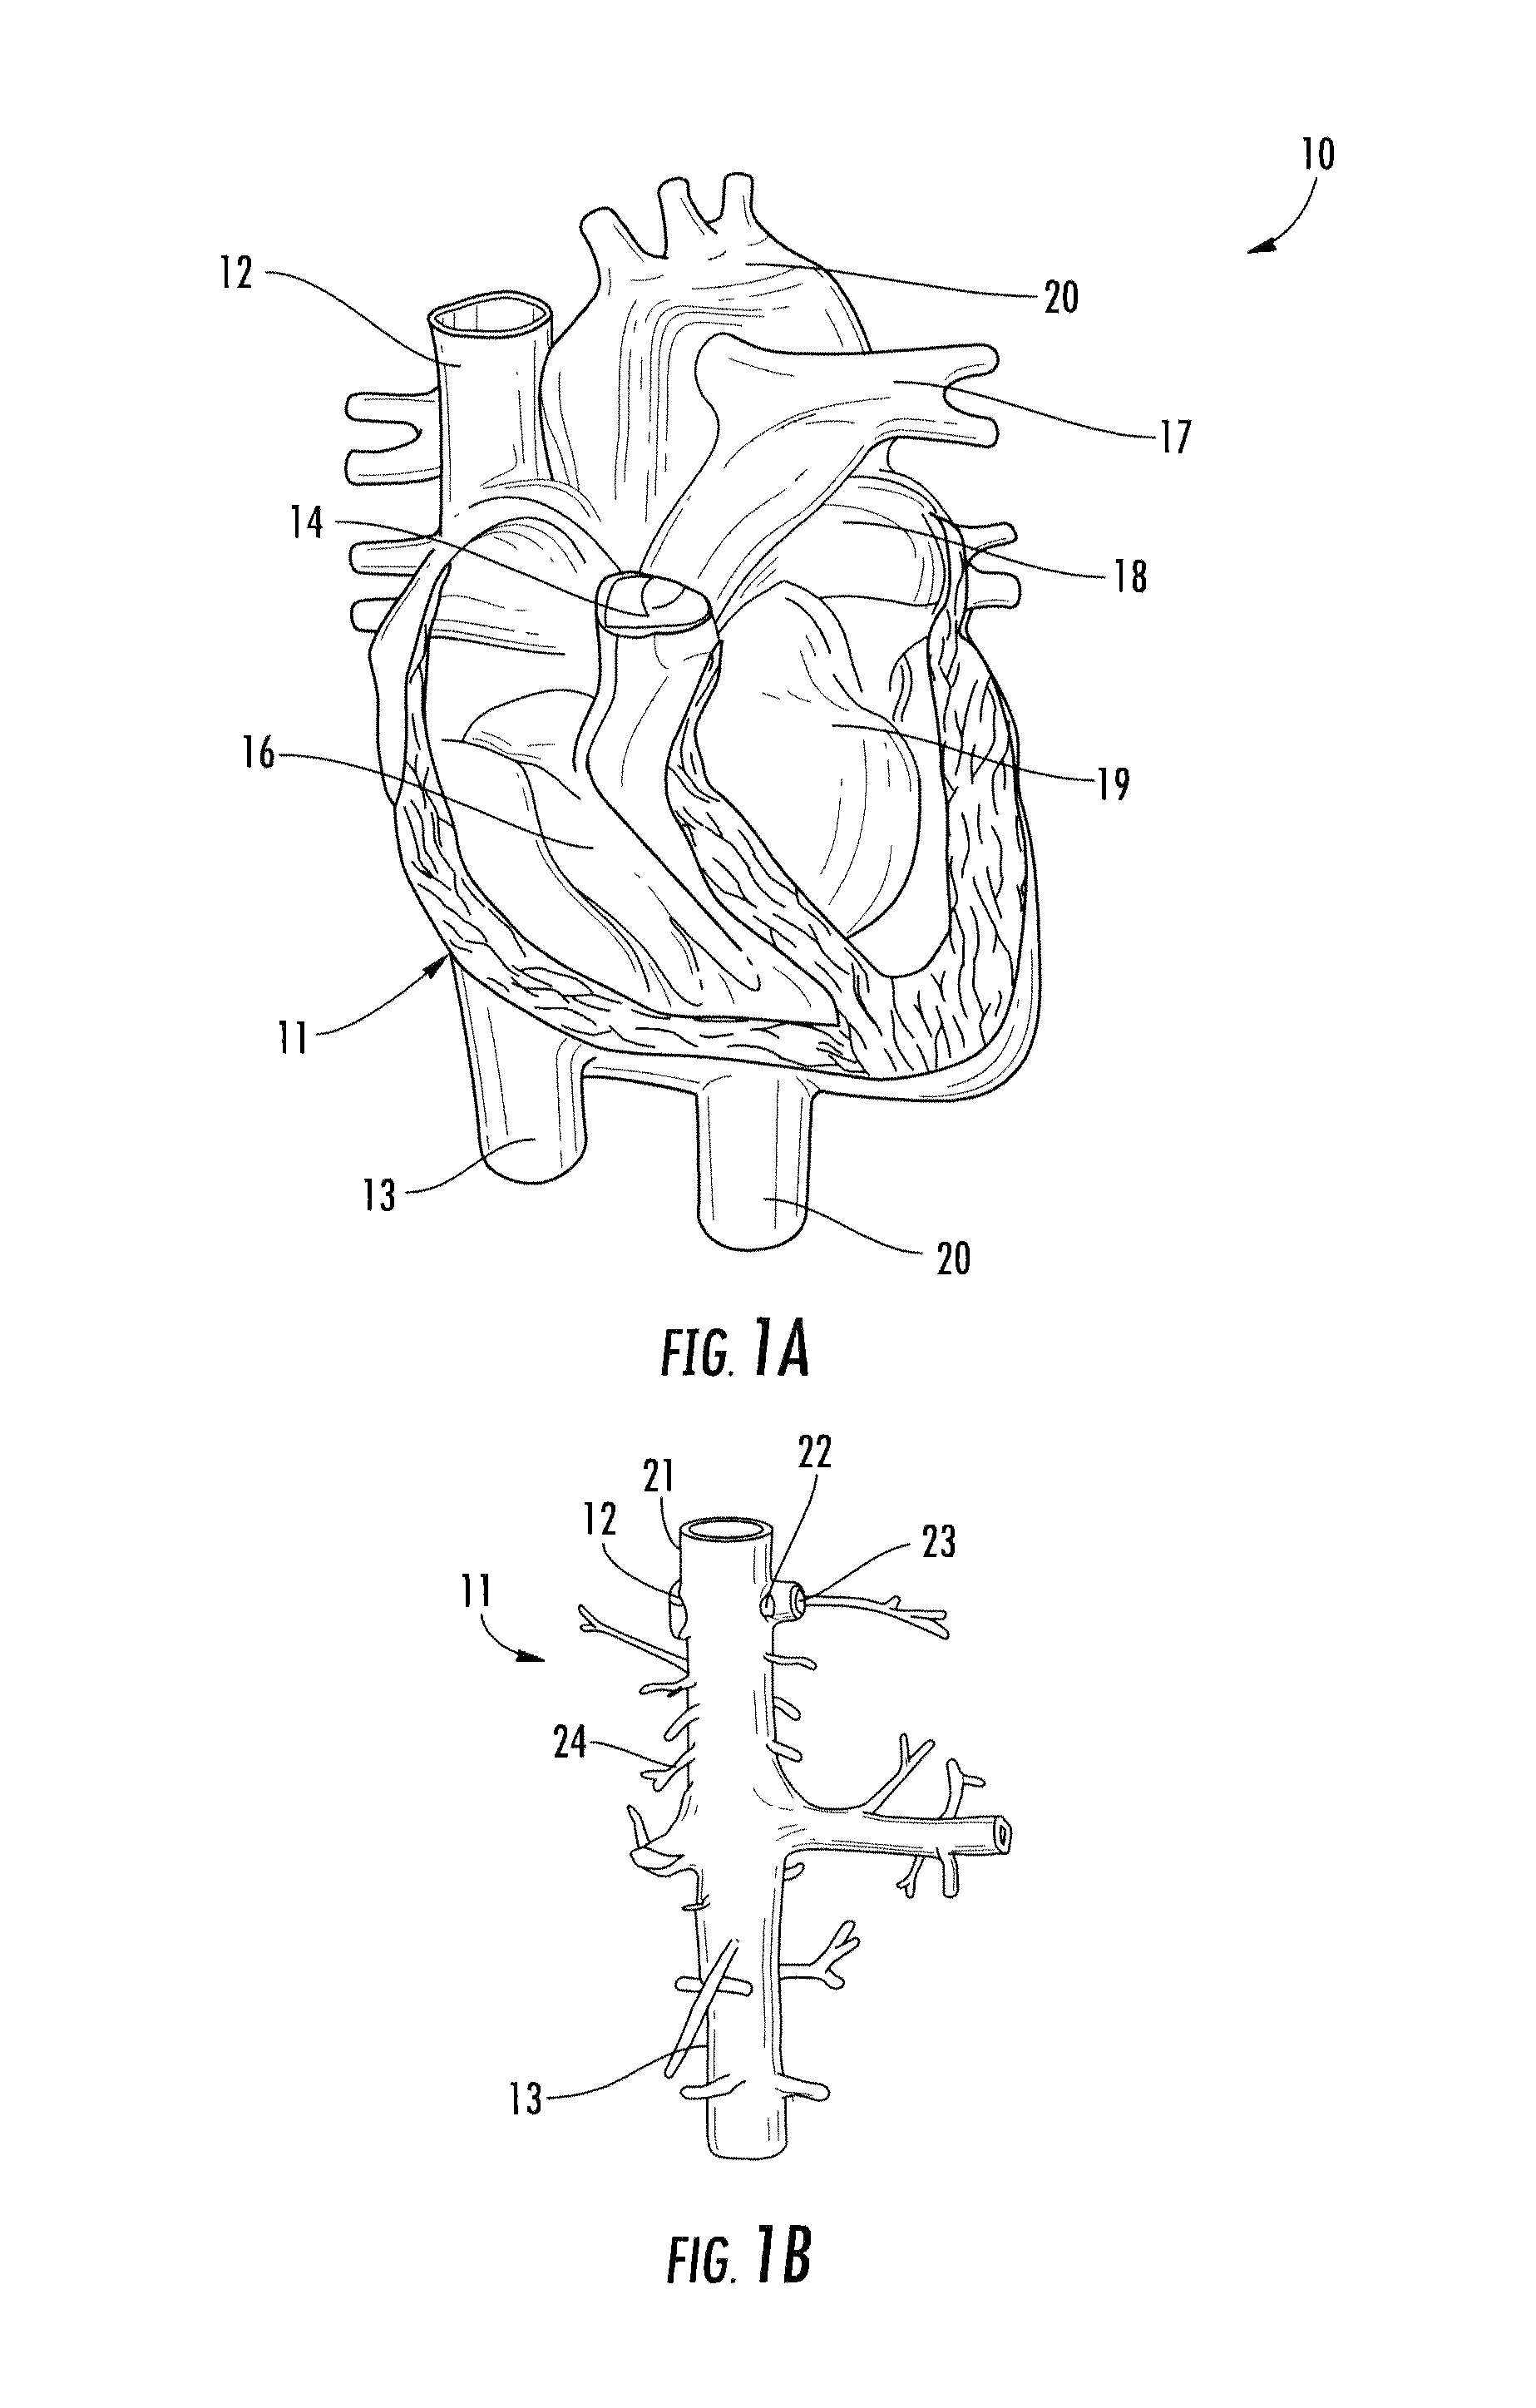 Systems and methods for treating acute and chronic heart failure